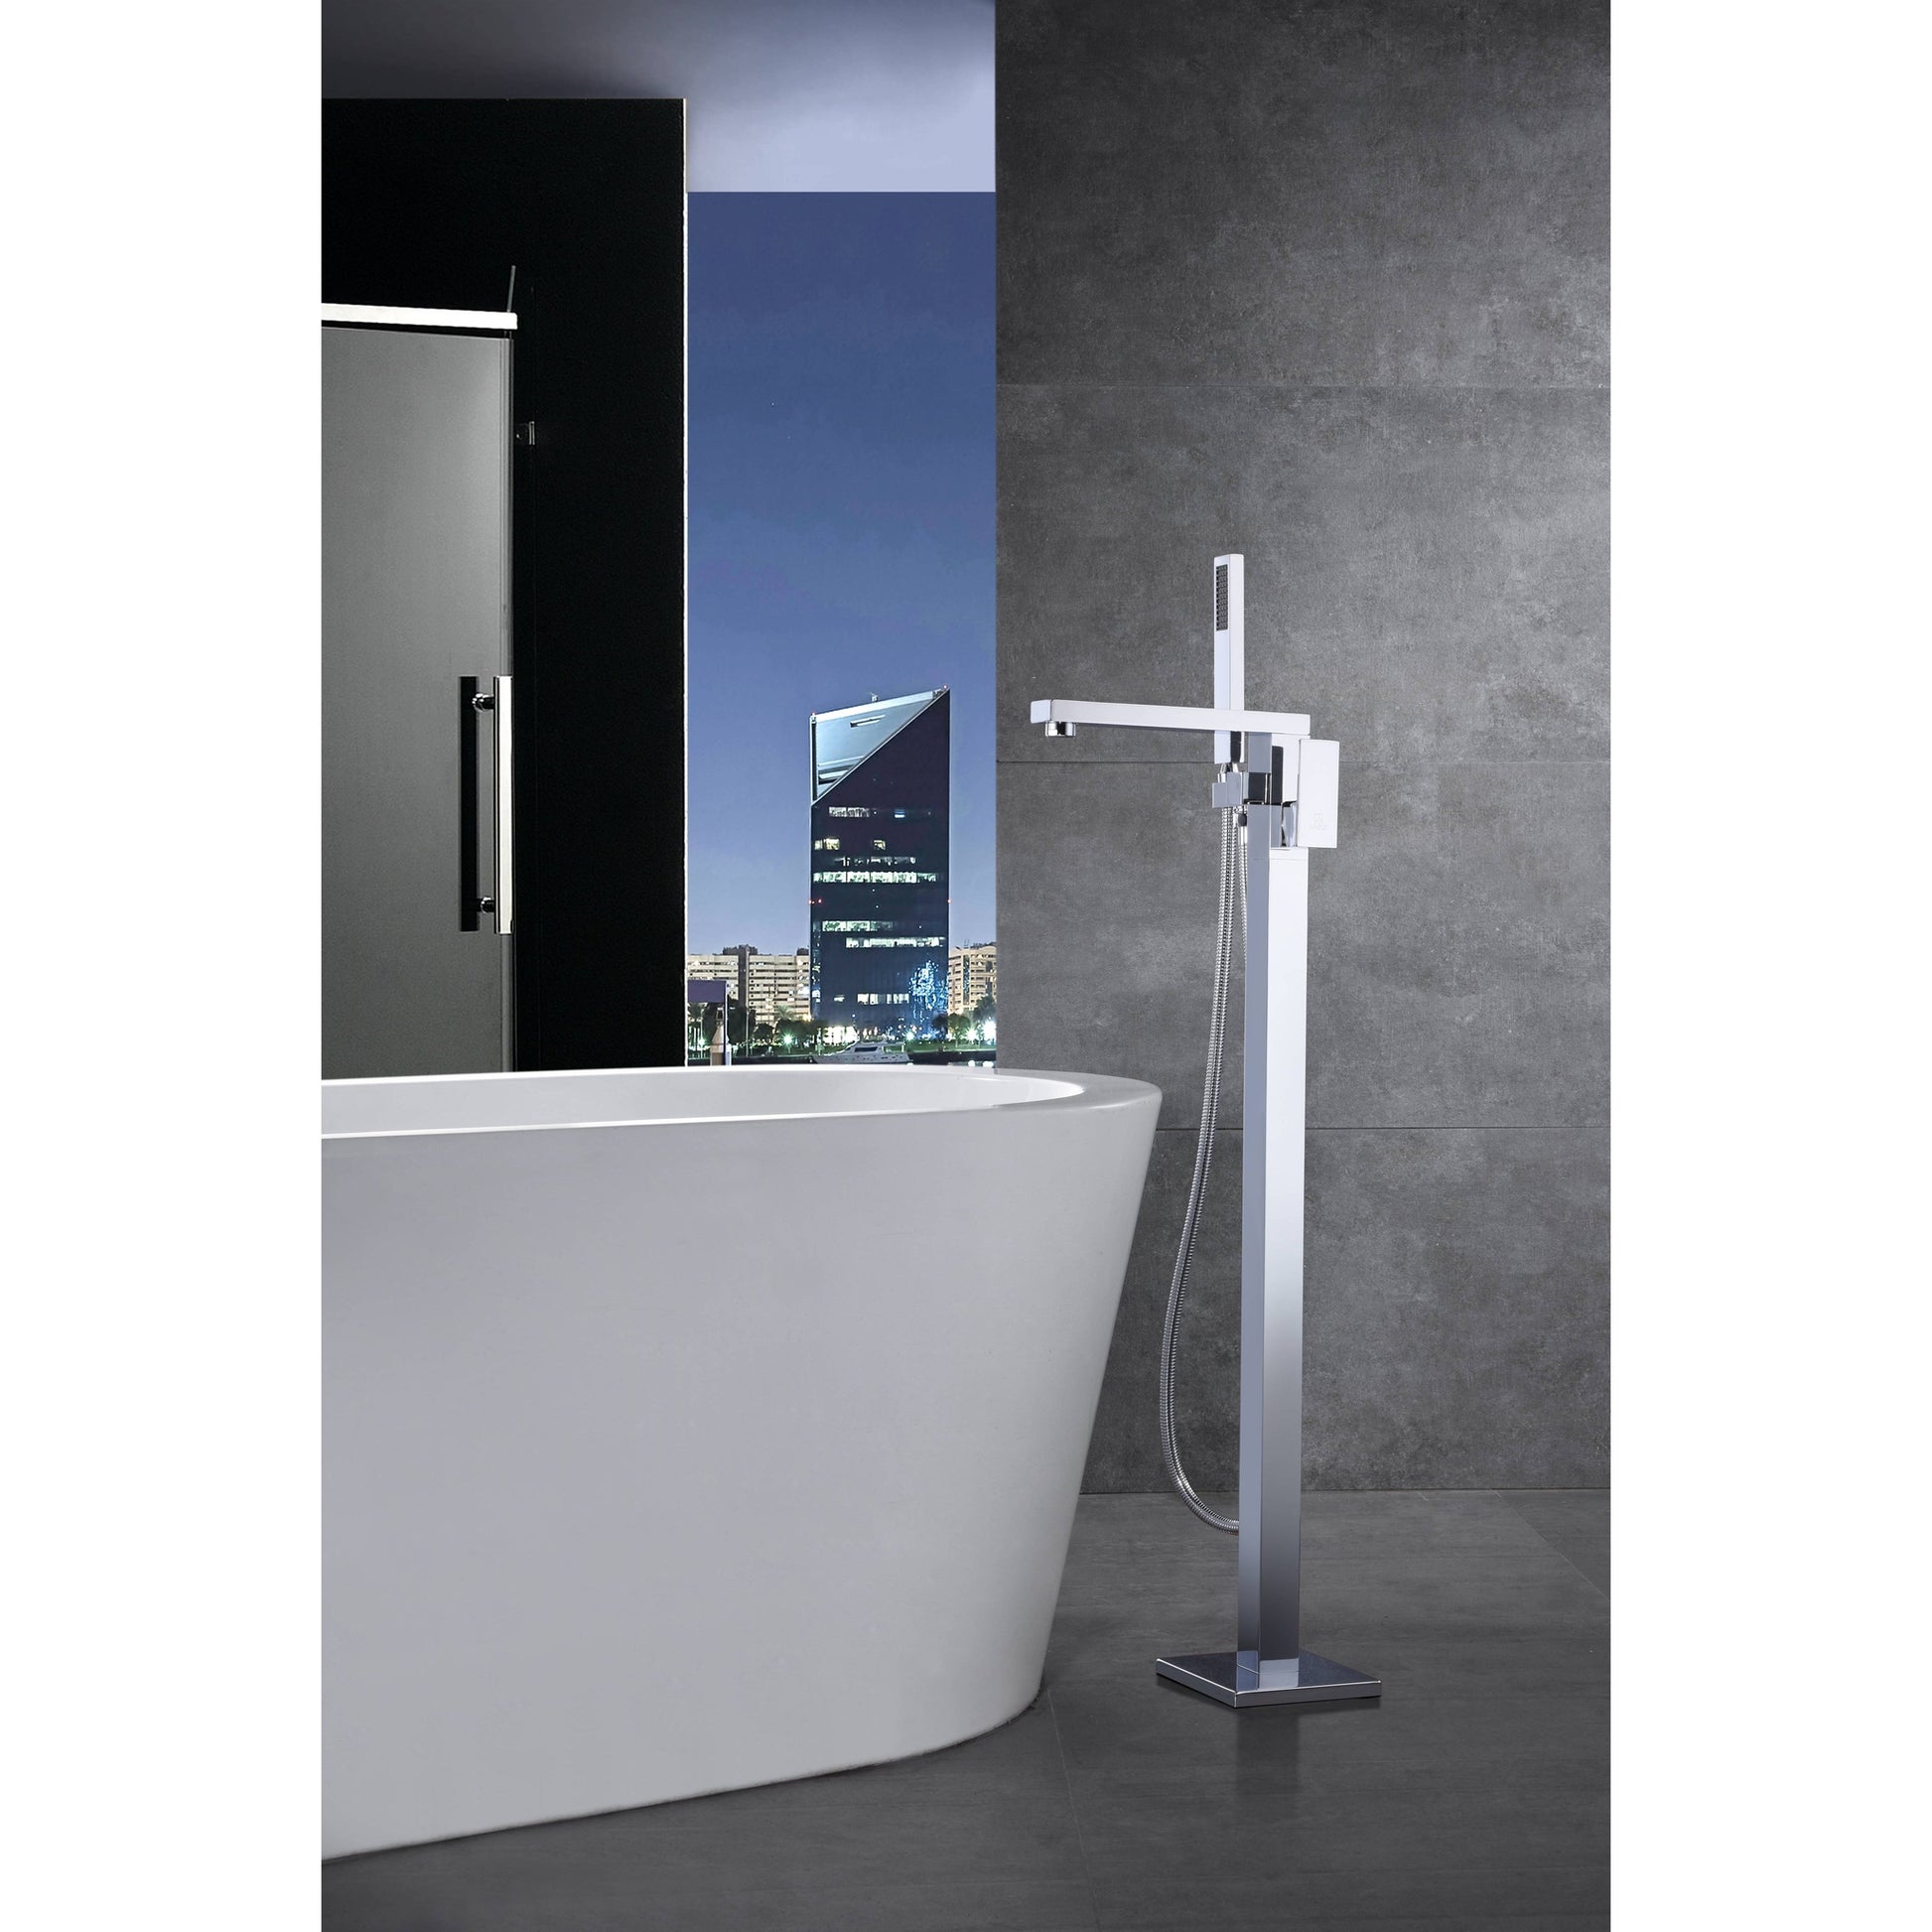 ANZZI Khone Series 2-Handle Polished Chrome Clawfoot Tub Faucet With Euro-Grip Handheld Sprayer